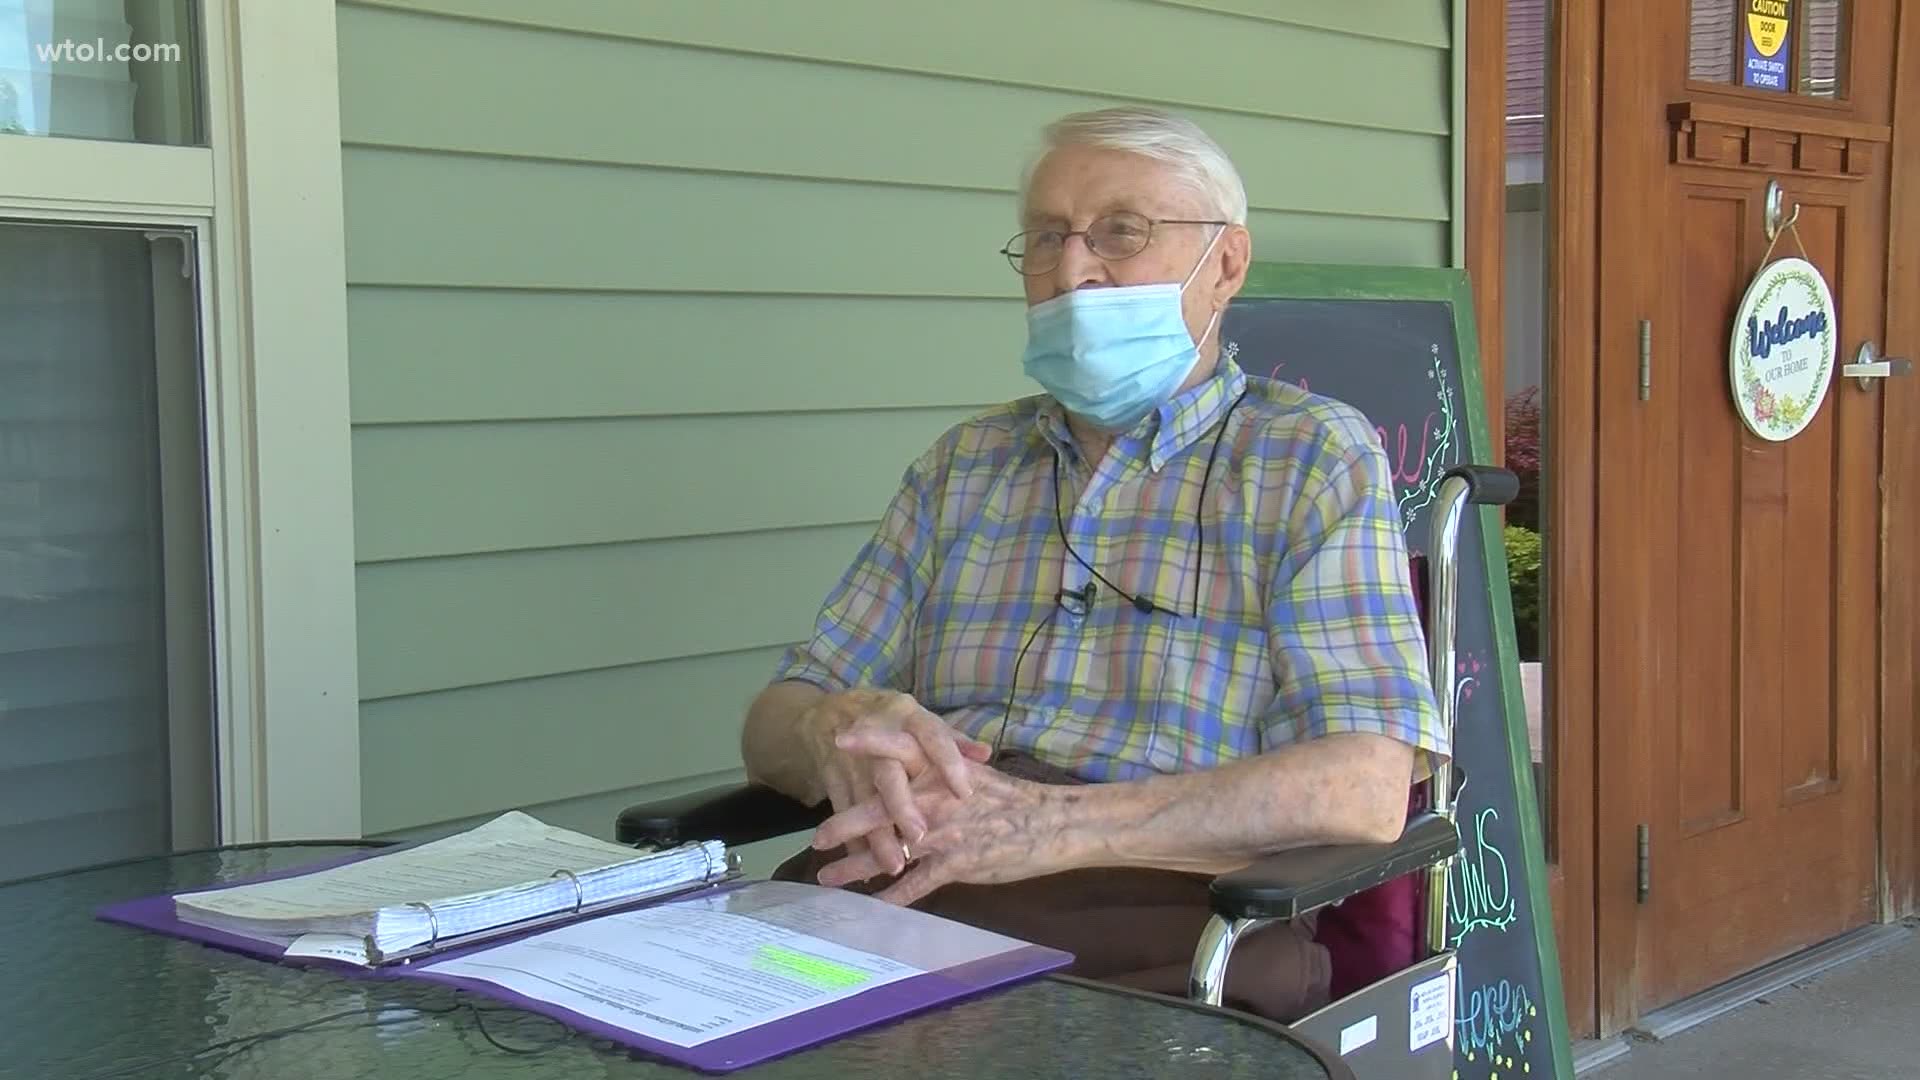 94-year-old Gene Wilbarger has been collecting quotes, words of wisdom and advice in a notebook for 10 years.